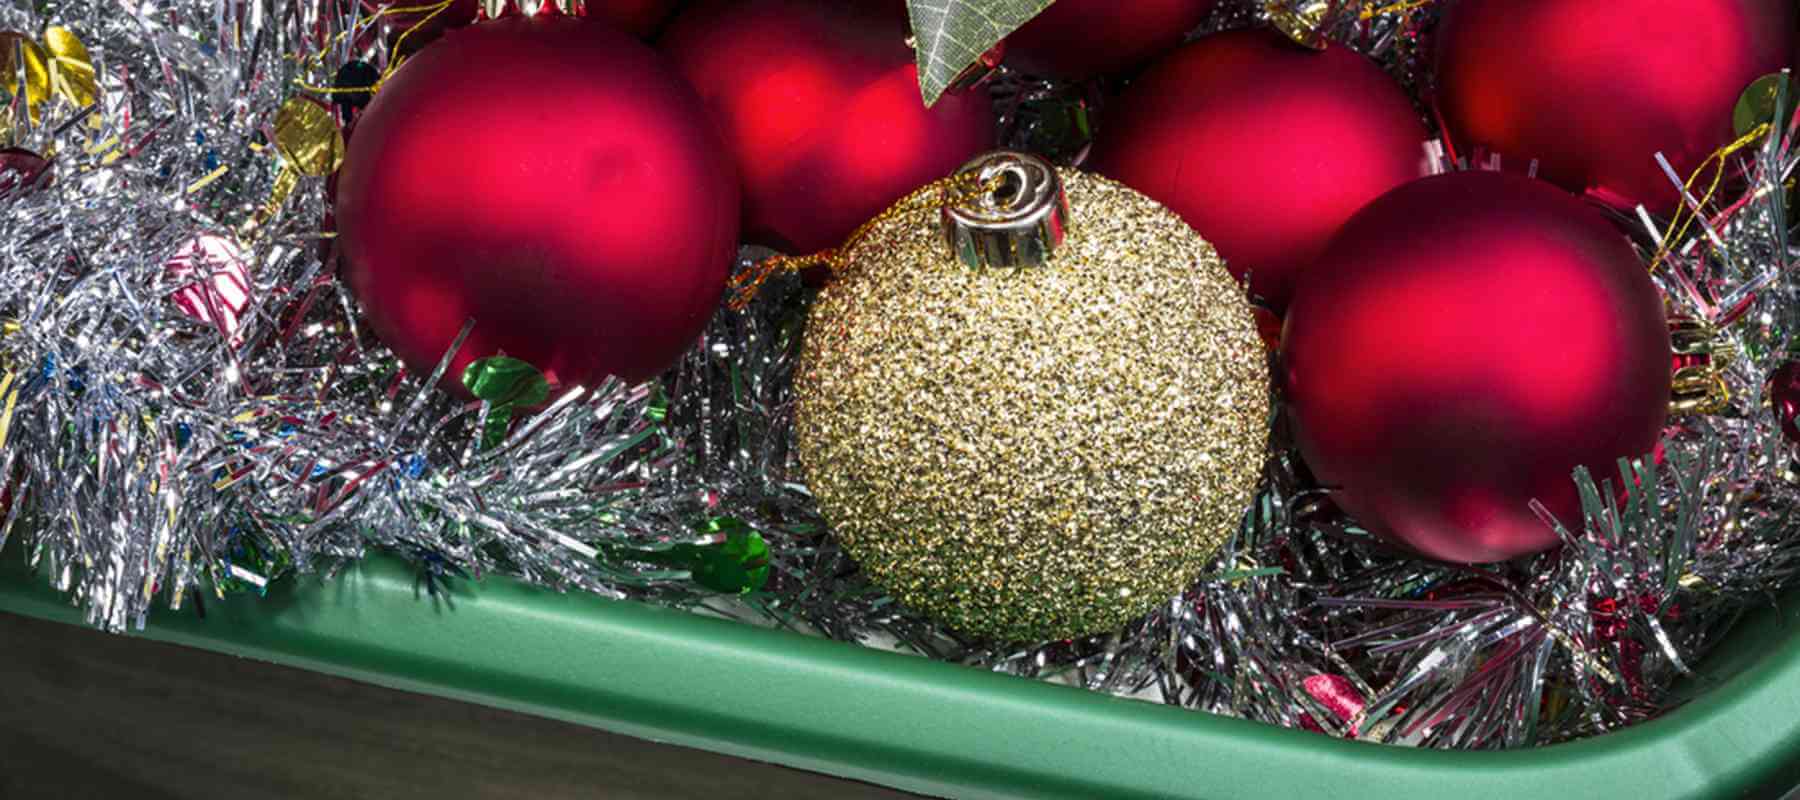 4 Easy Tips for Storing Your Christmas Decorations